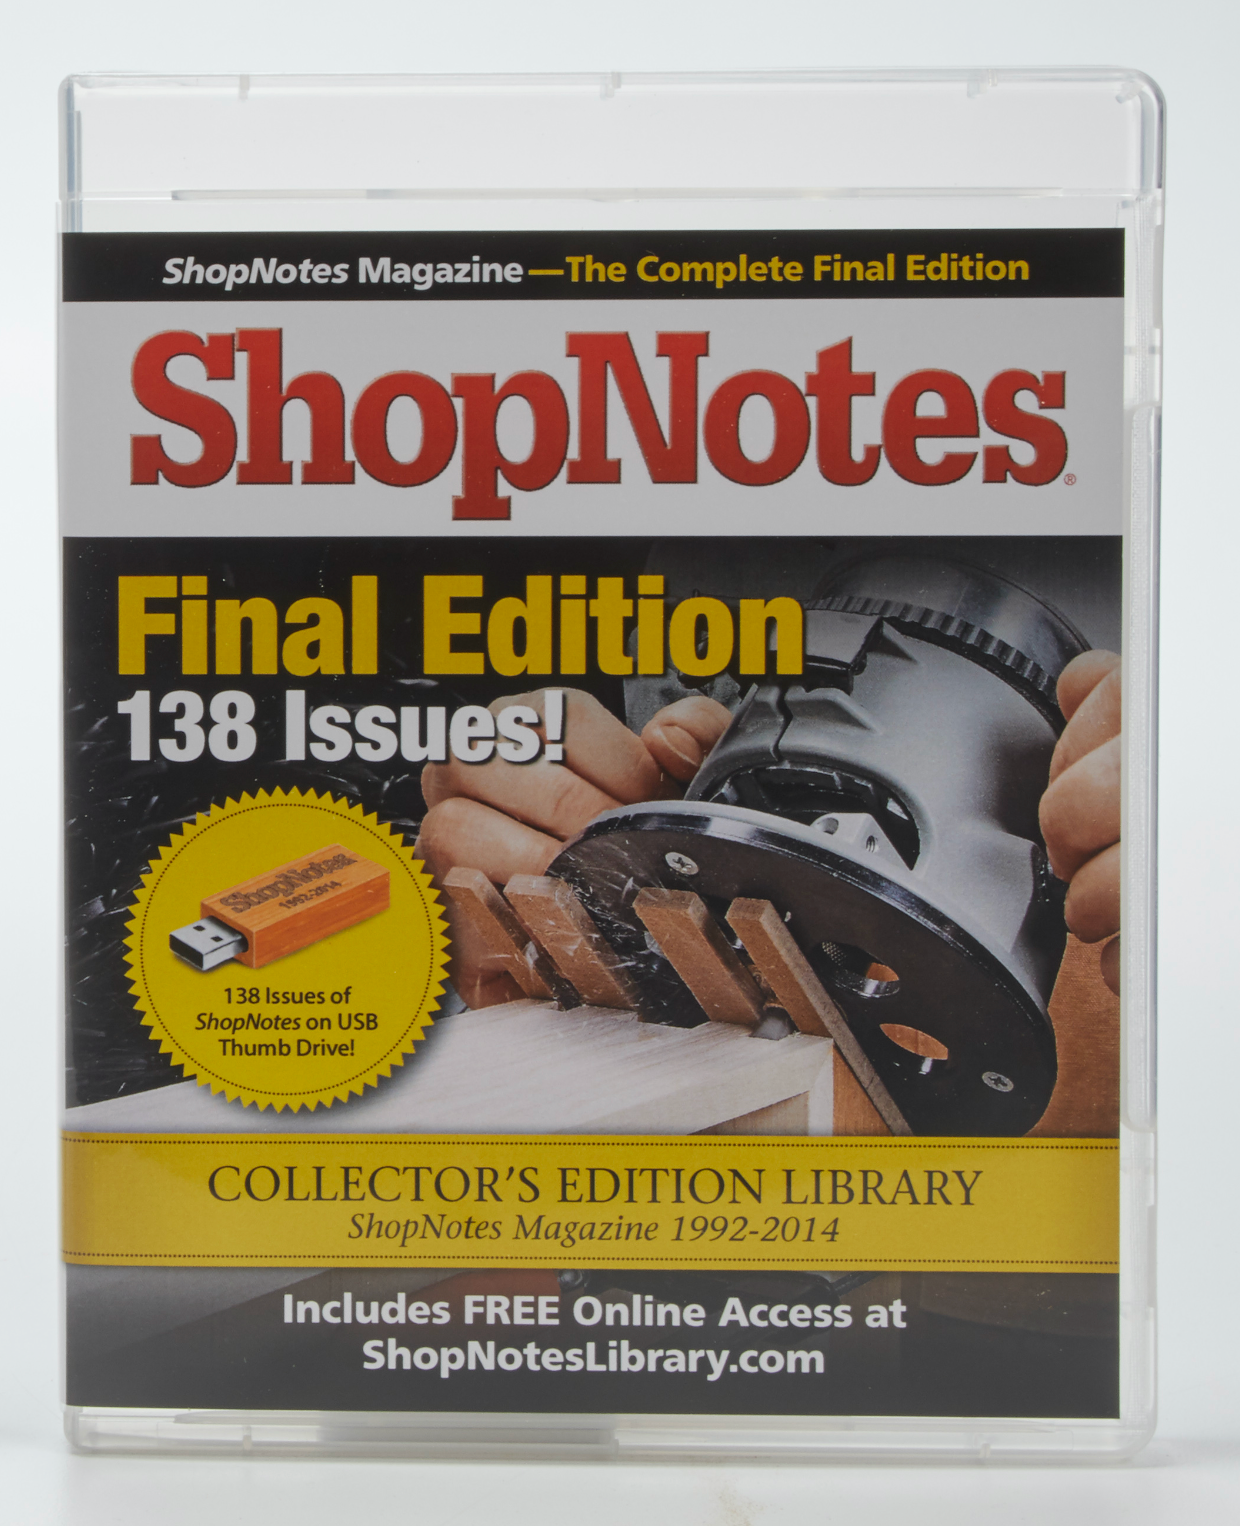 ShopNotes Back Issue Library USB Drive